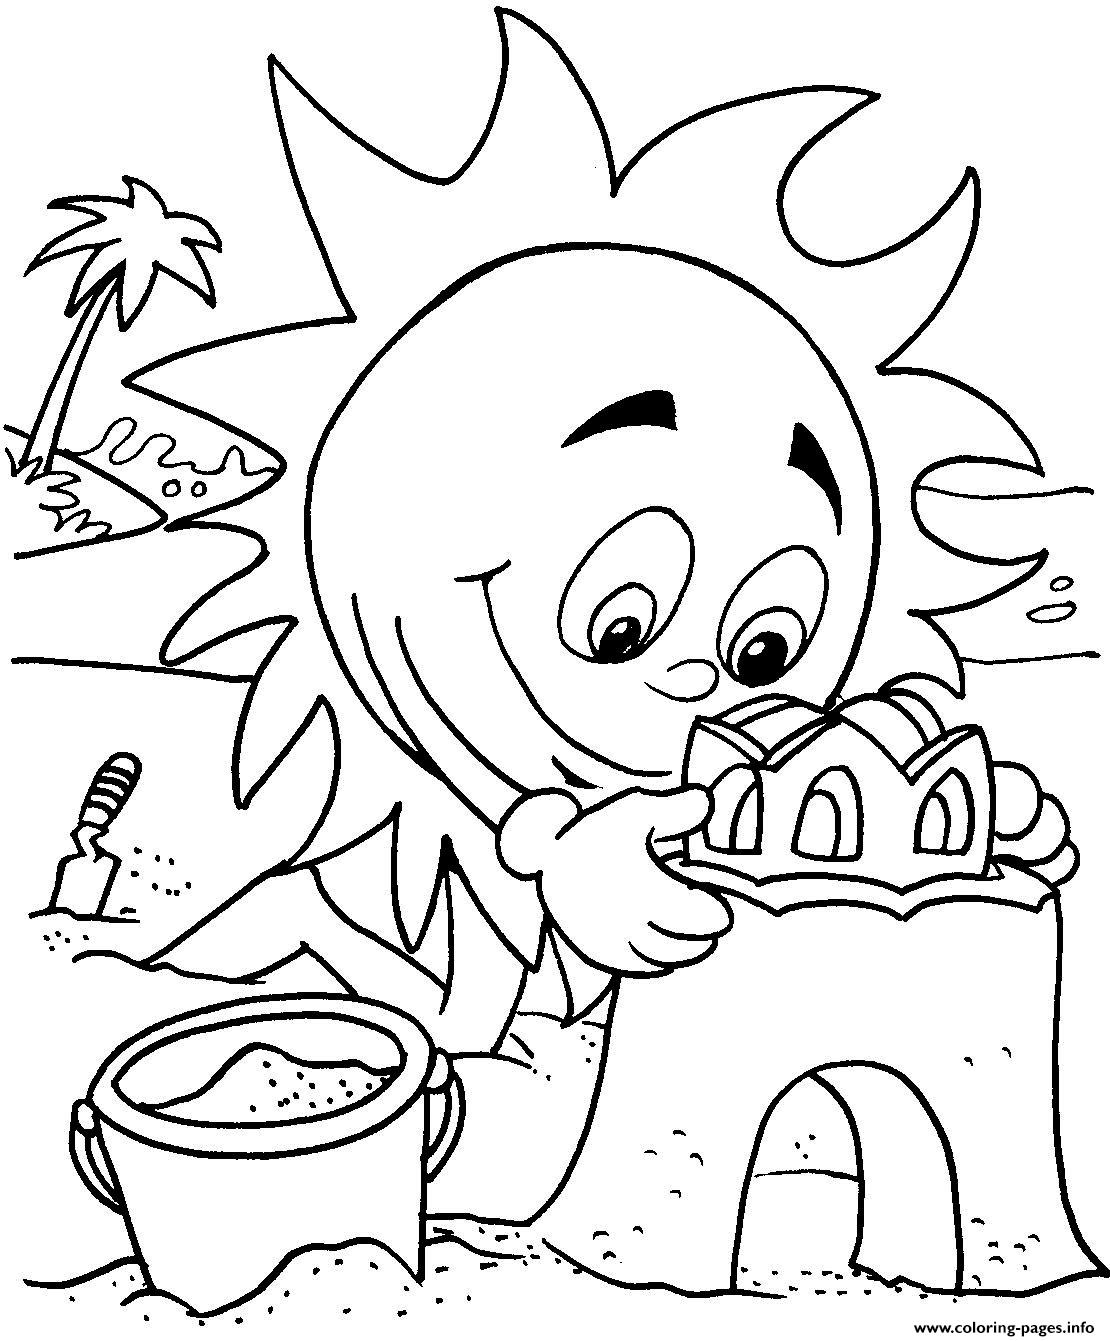 Coloring Pages For Kids In The Summerbfa9 coloring